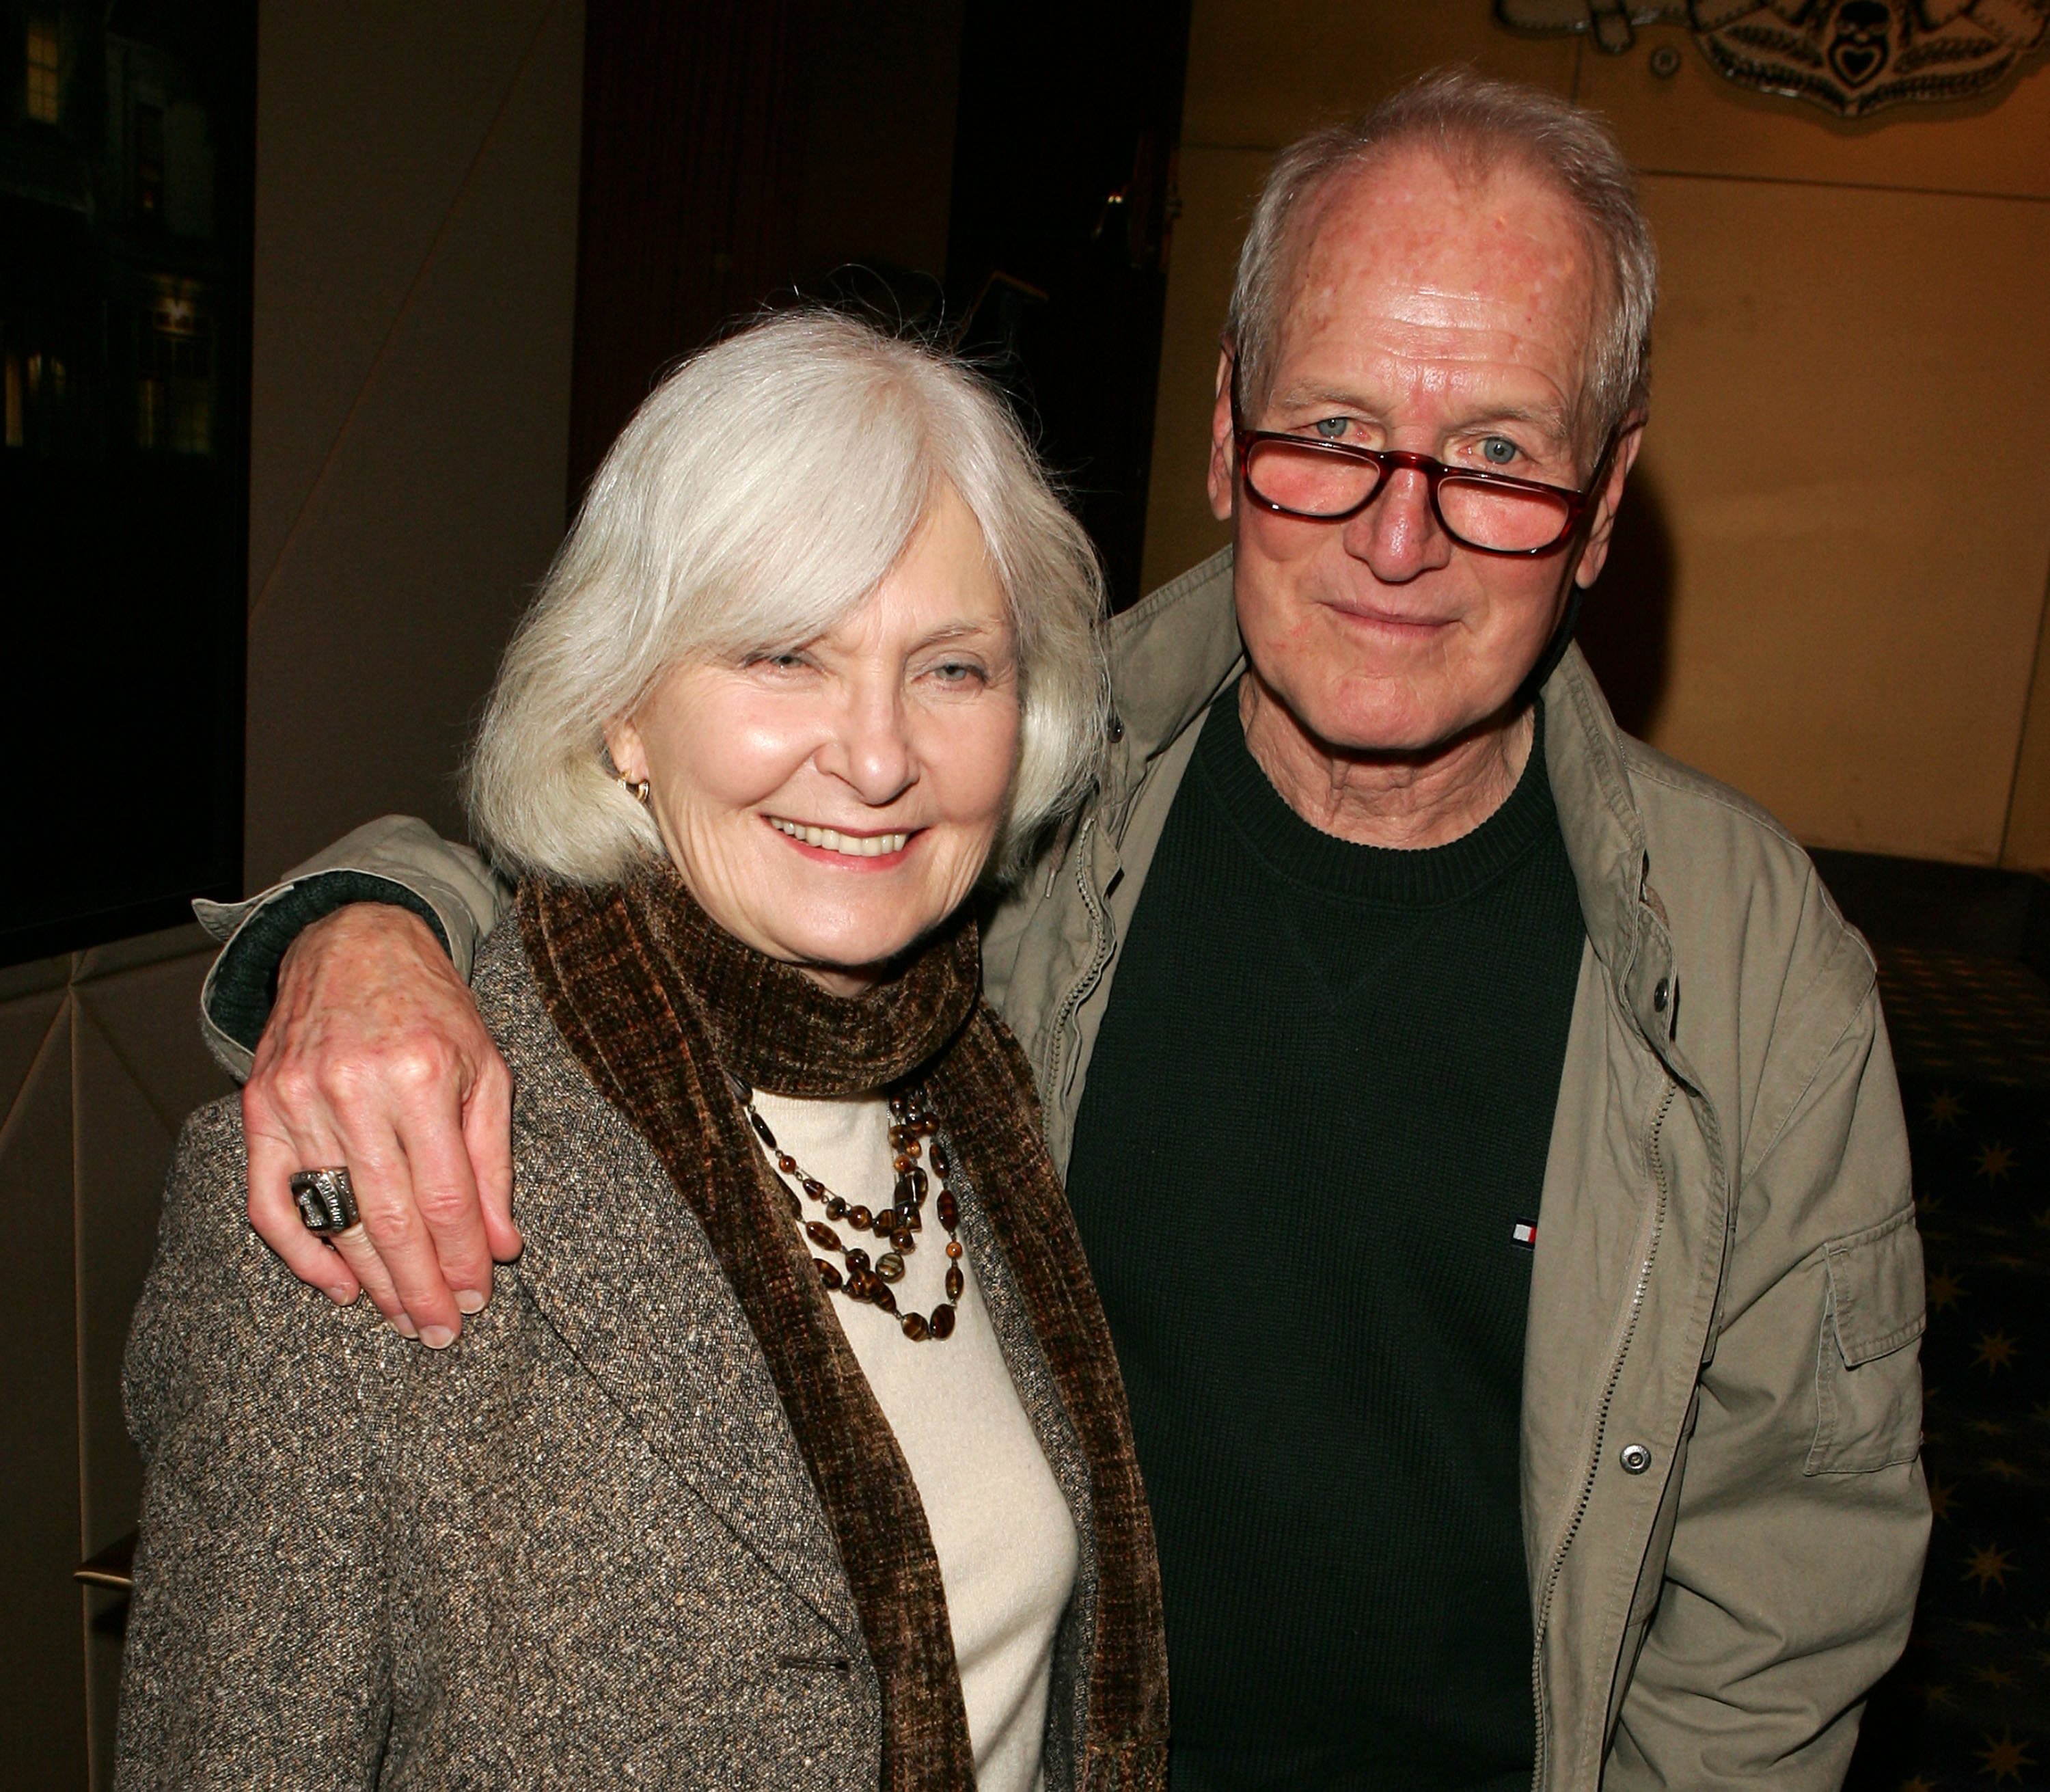 Joanne Woodward and Paul Newman attend a reception for a special screening of "The Woodsman," 2004, New York City. | Source: Getty Images